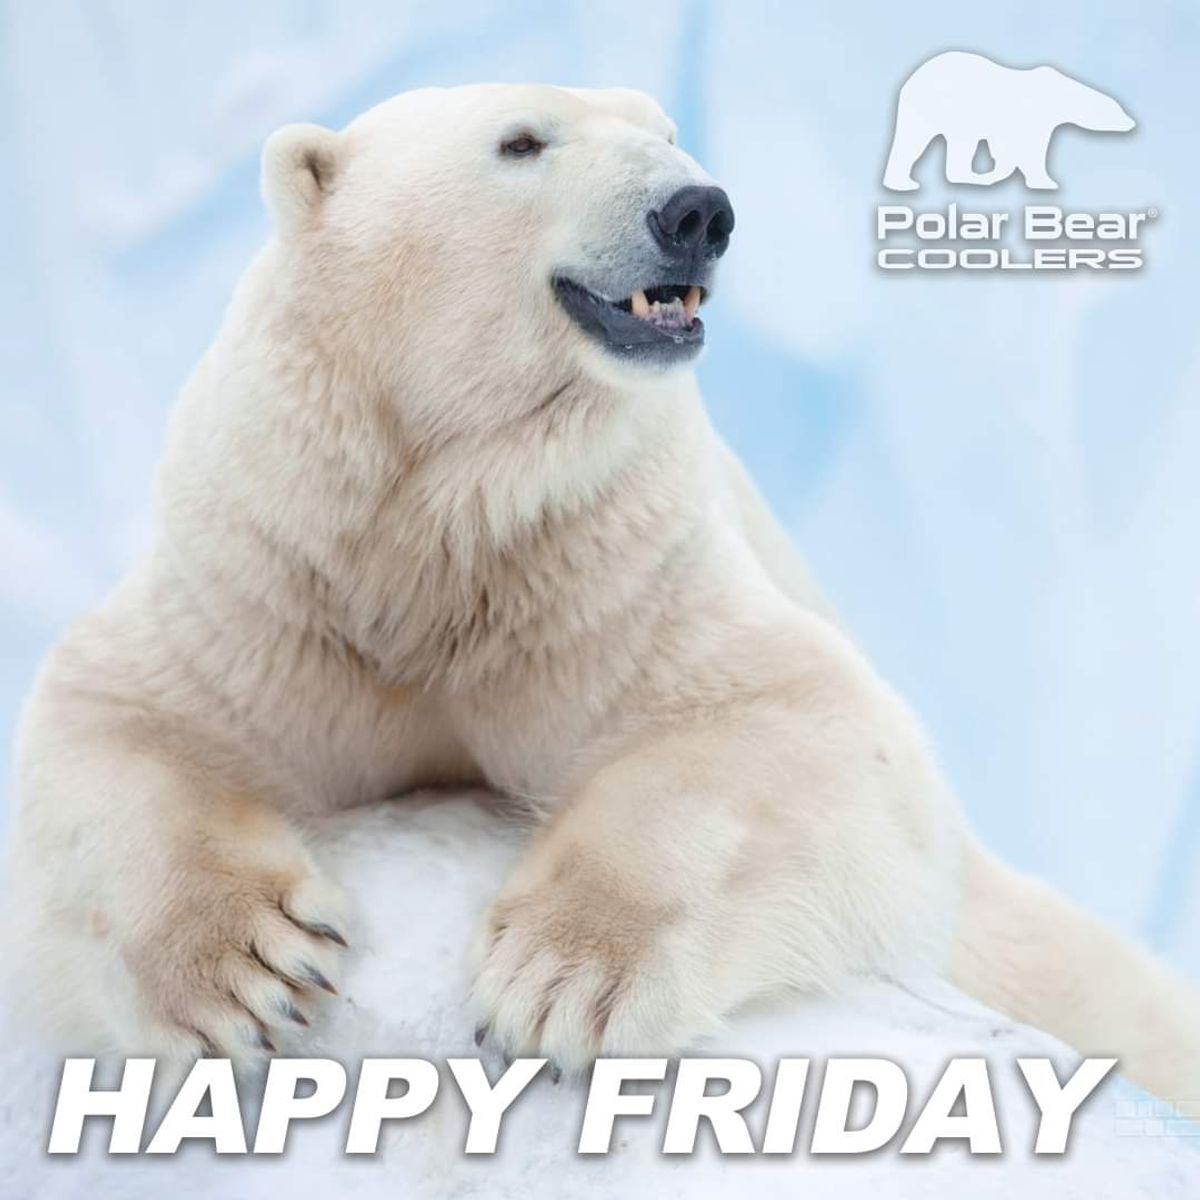 happy-friday-visit-our-website-polar-bear-coolers